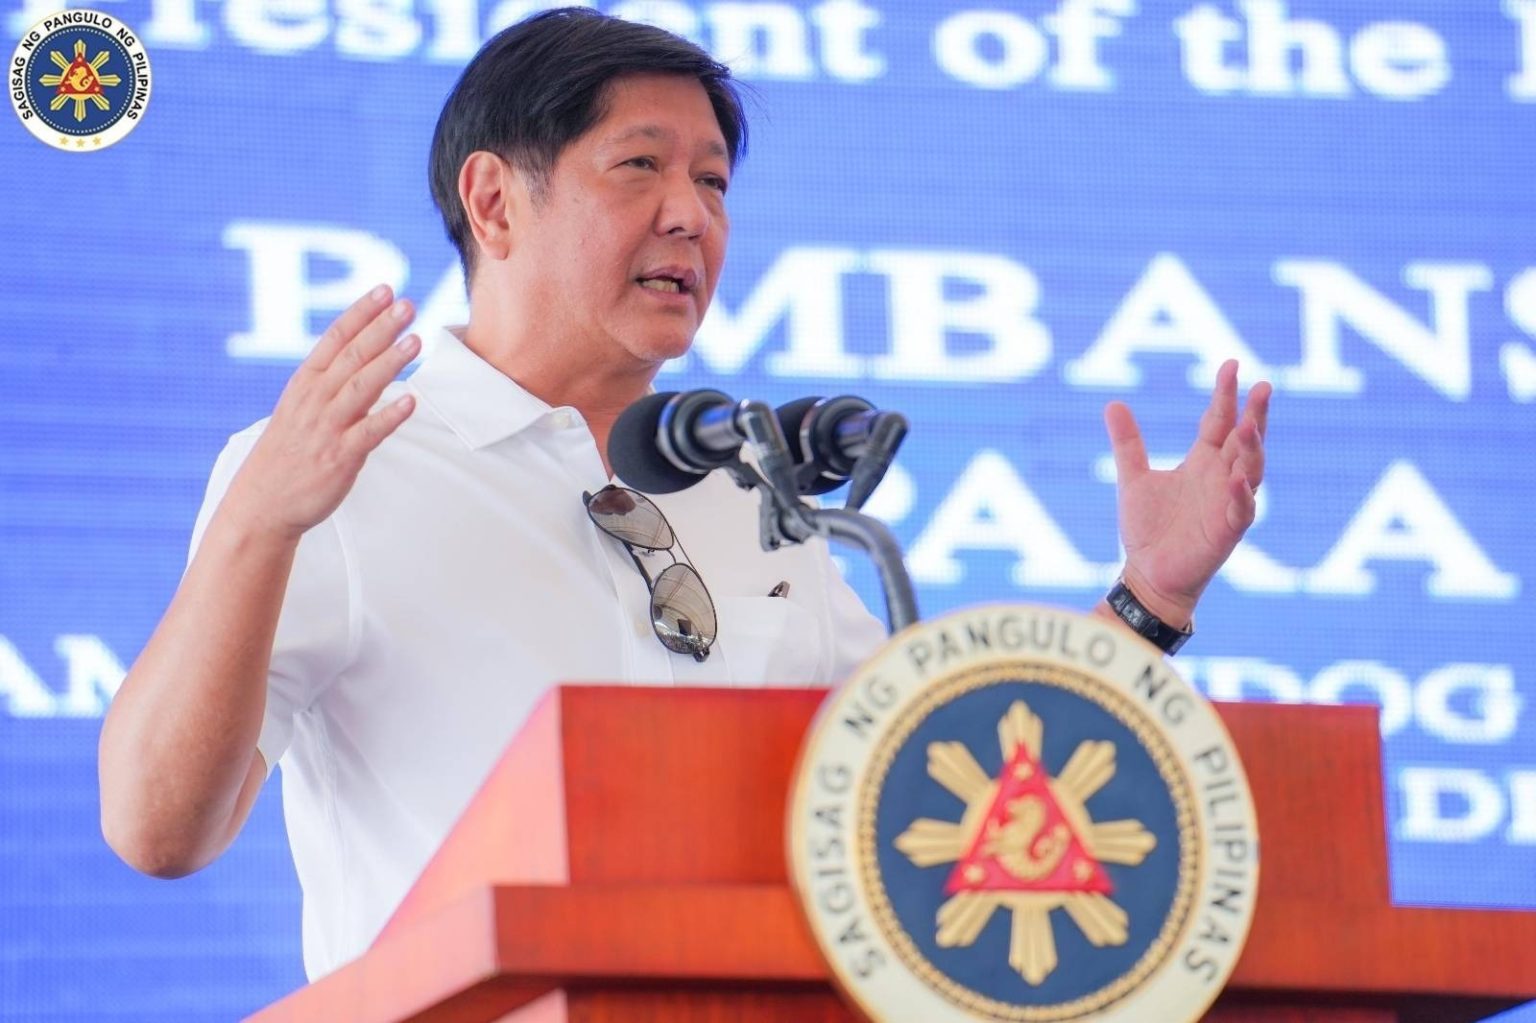 President Ferdinand Marcos Jr. says the launching of the Wholesale Electricity Spot Market in Mindanao will prompt investments and economic activity in the region